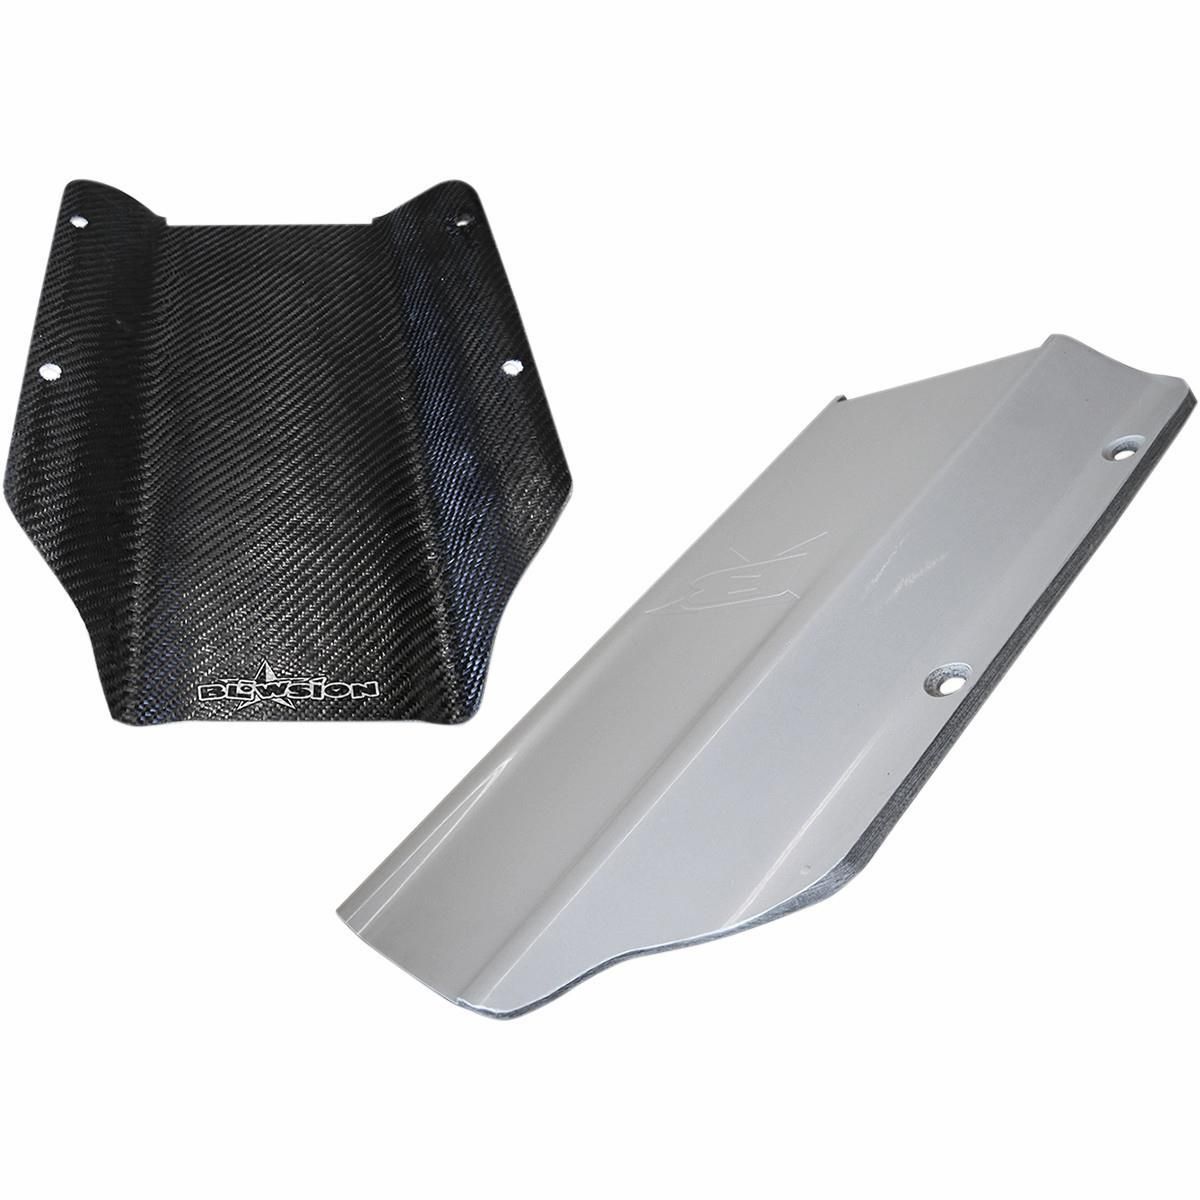 33B0-BLOWSION-02-01-242 Composite Ride Plate